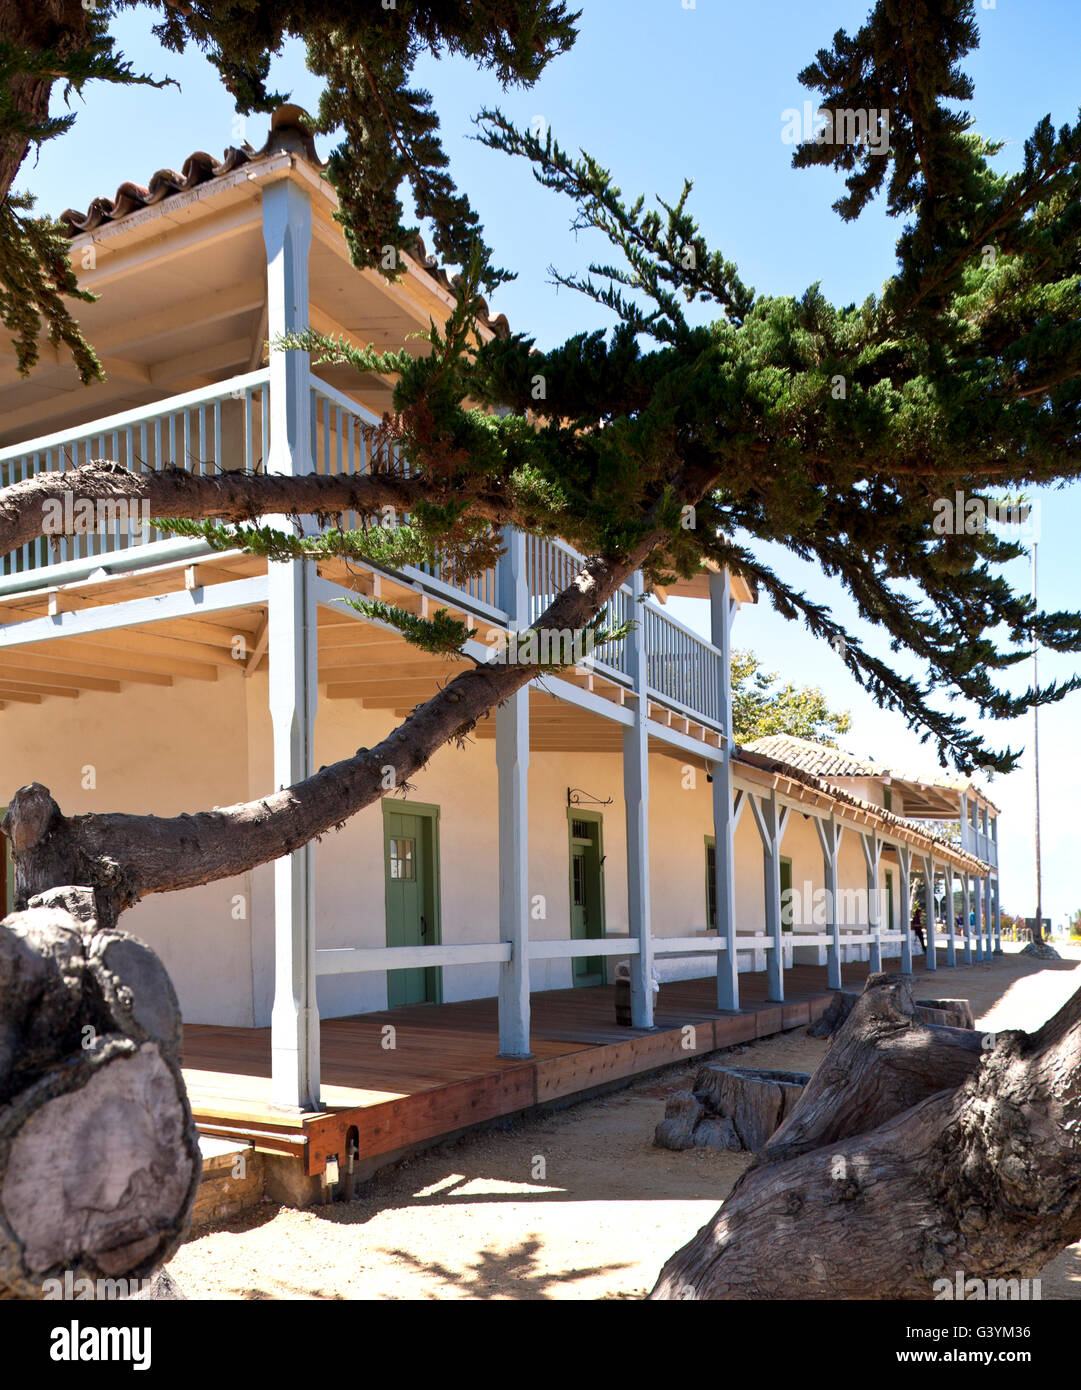 The Custom House at Monterey State Historic Park is California Landmark No. 1, the oldest government building in state. Stock Photo